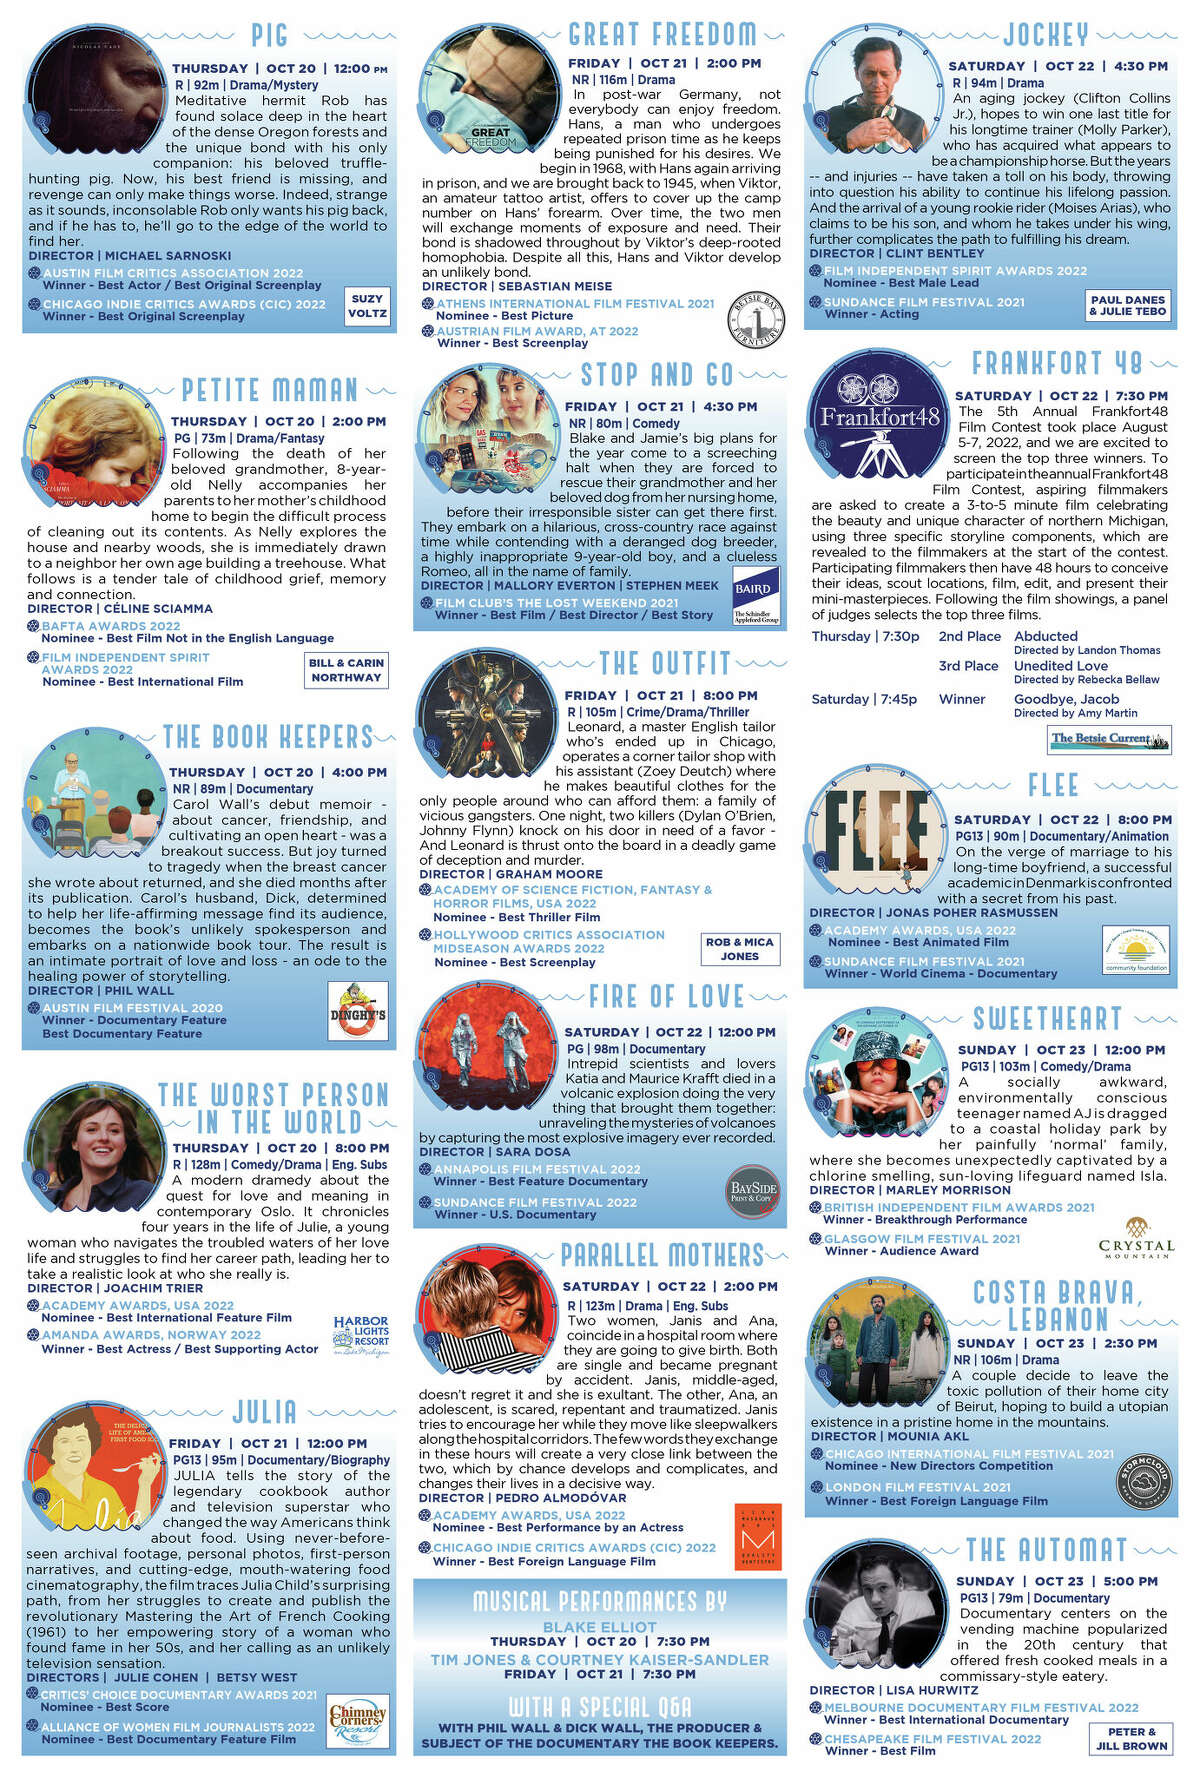 The 14th annual Frankfort Film Festival schedule of events.